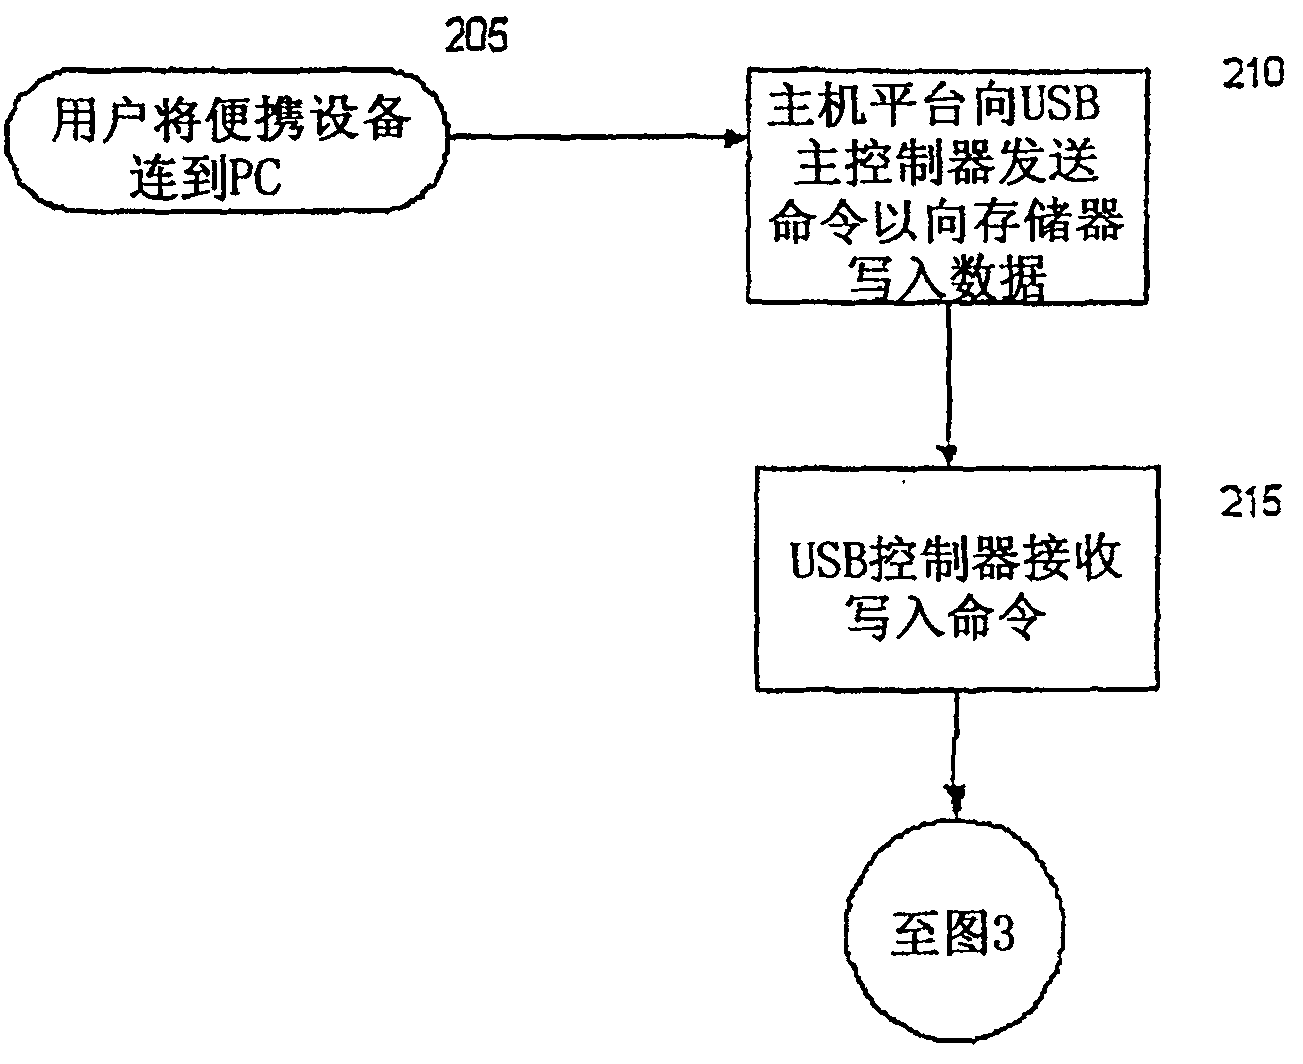 System and device for compressing and decompressing stored data in portable data storage device